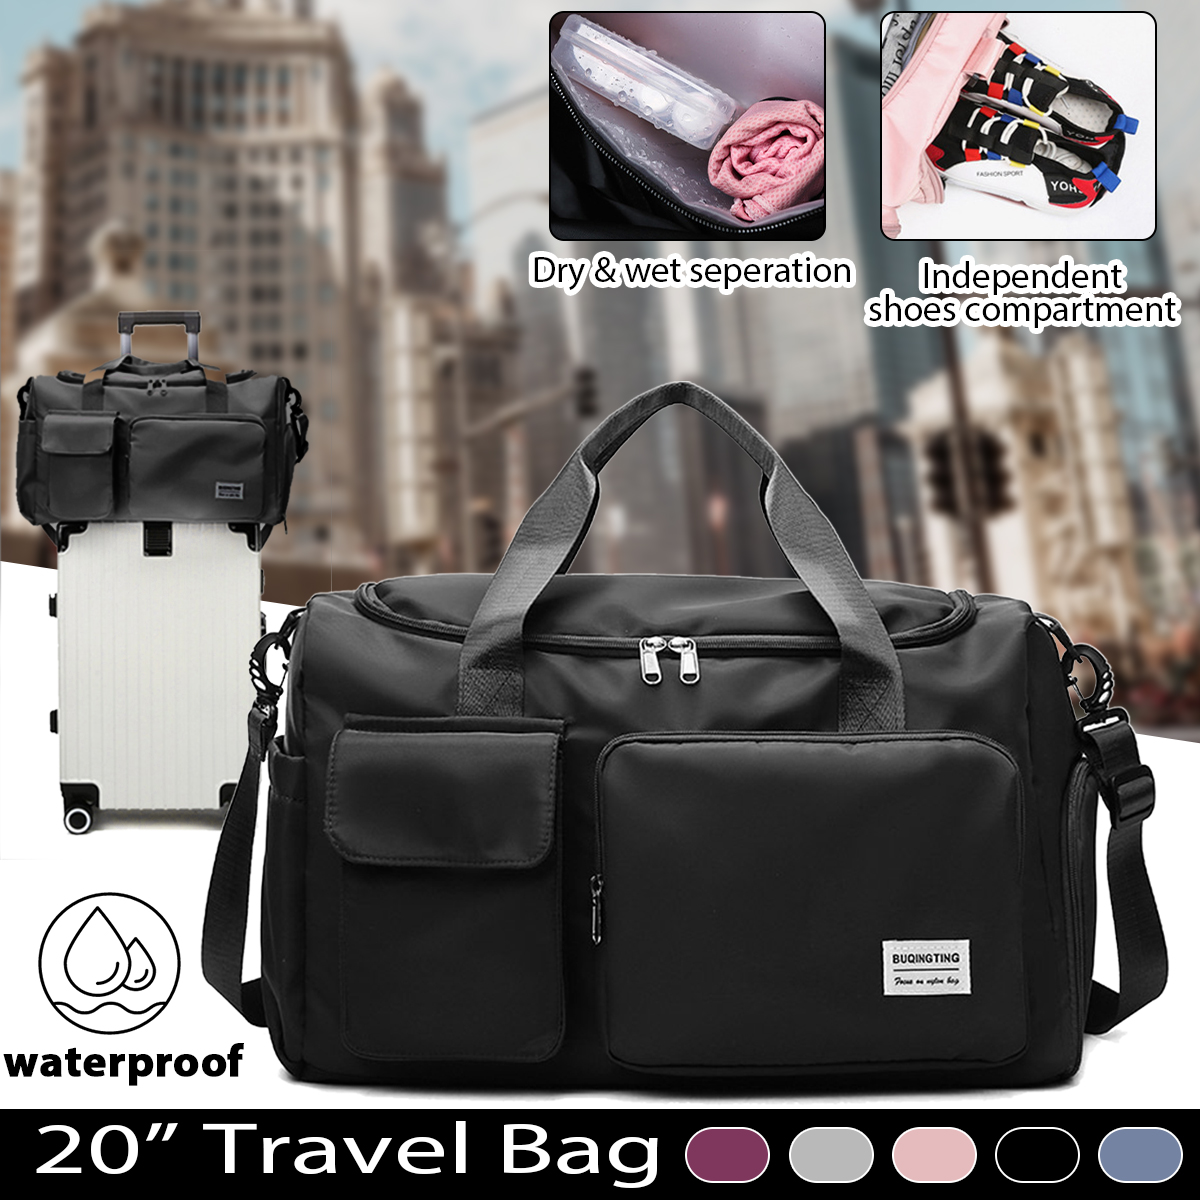 20-Waterproof-Outdoor-Travel-Bag-Large-Capacity-with-Shoes-Compartment-Storage-Bag-Short-Tour-Weeken-1854807-1